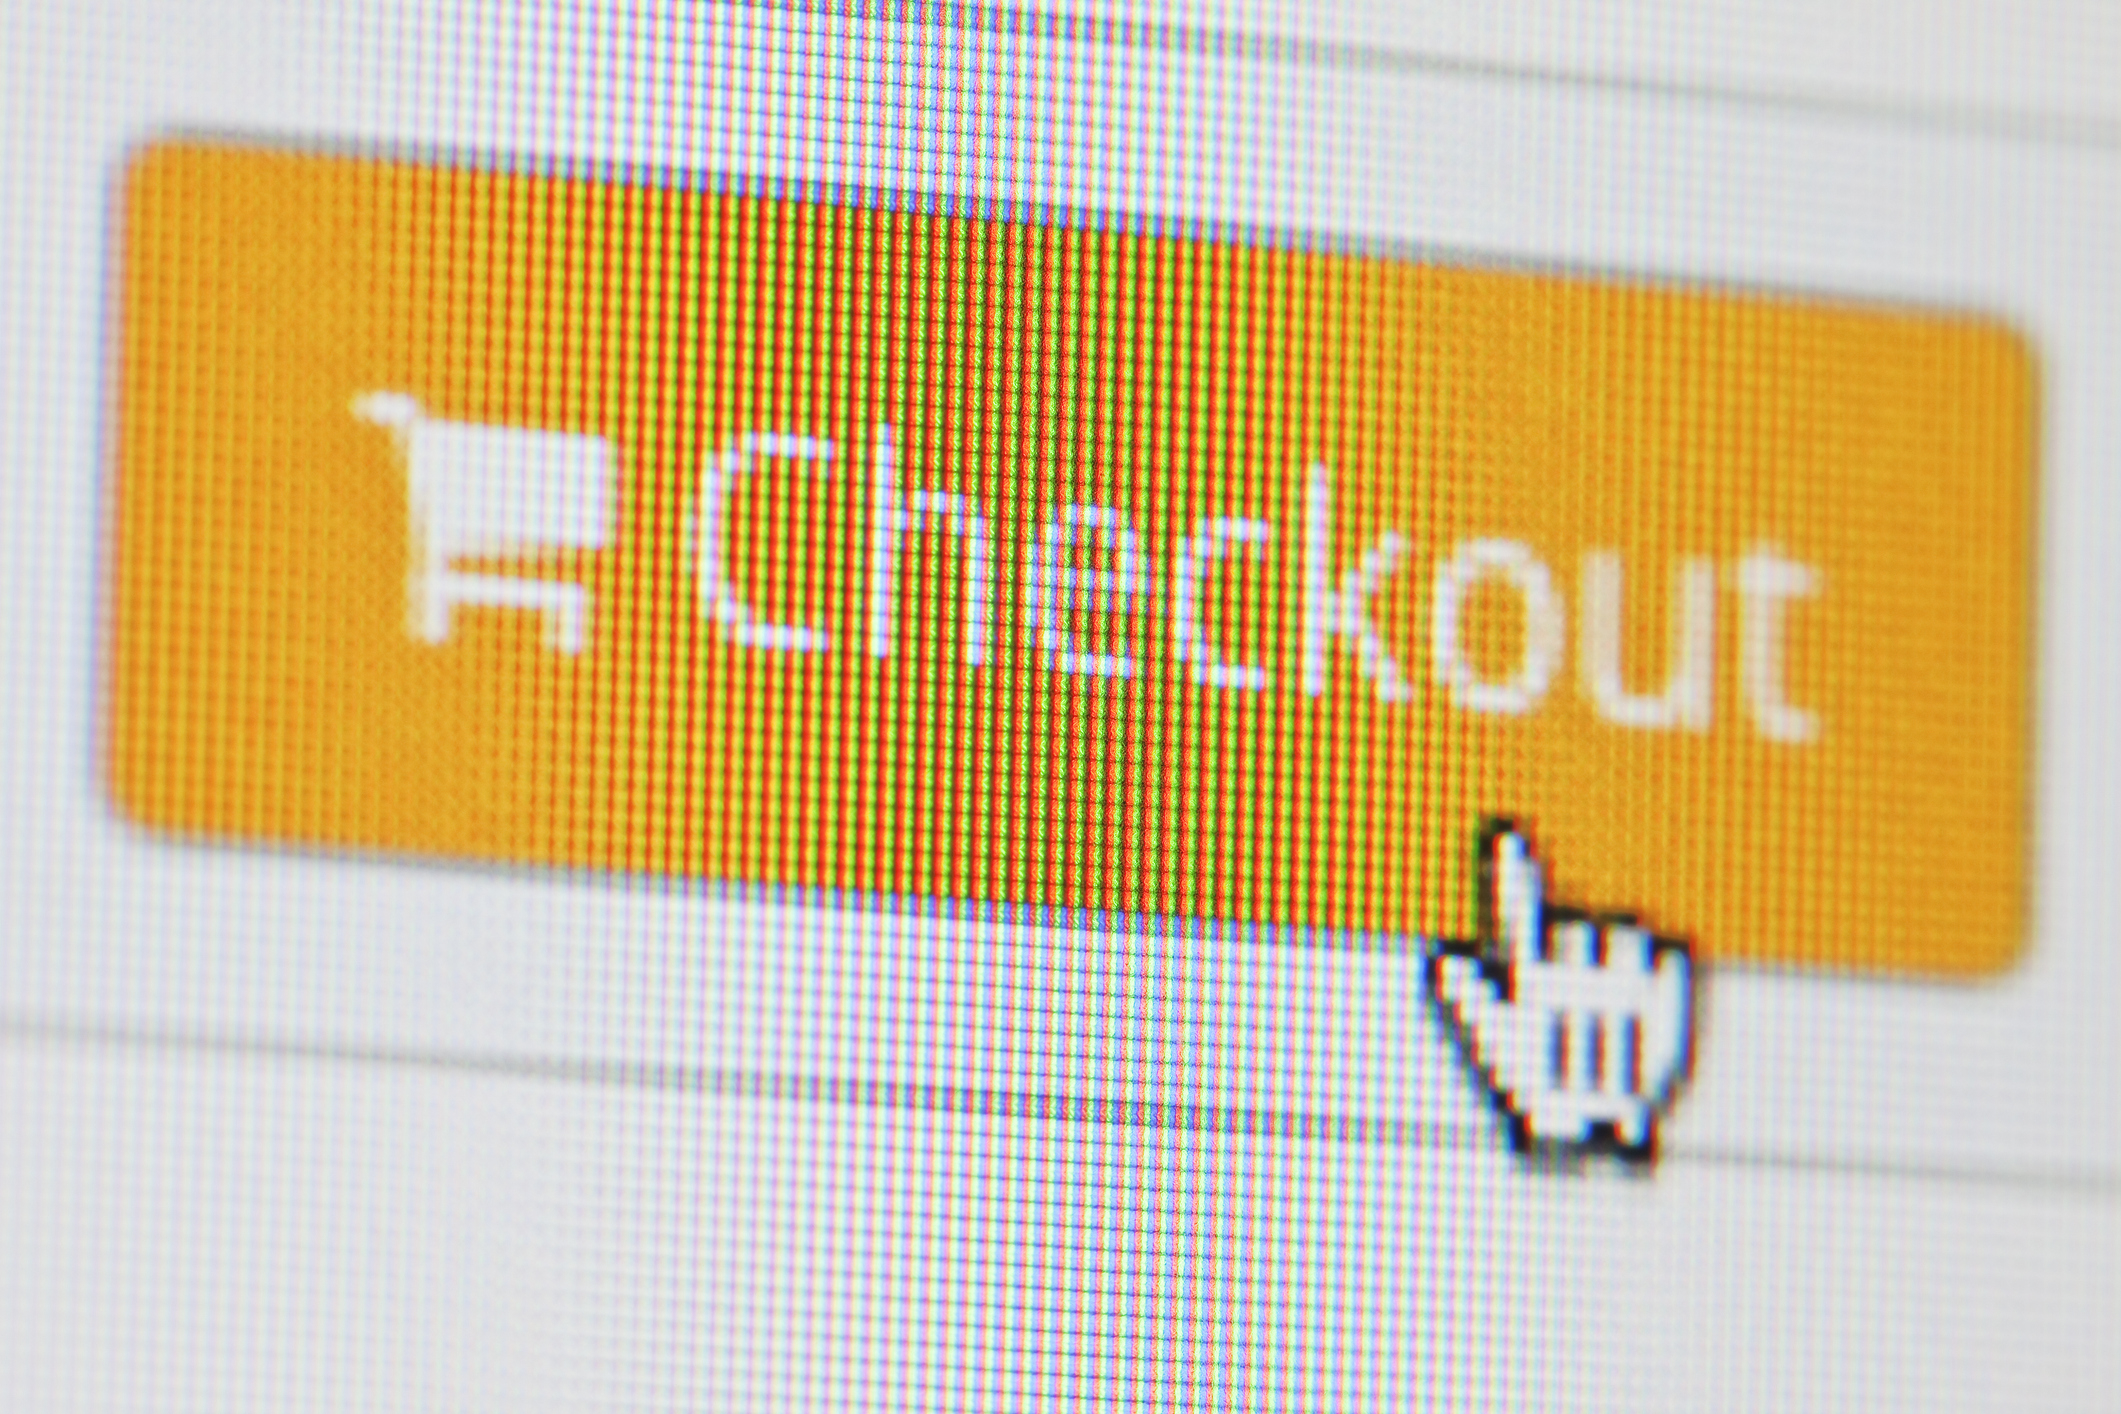 Online shopping cart with a cursor clicking a &quot;Checkout&quot; button, symbolizing an online purchase transaction